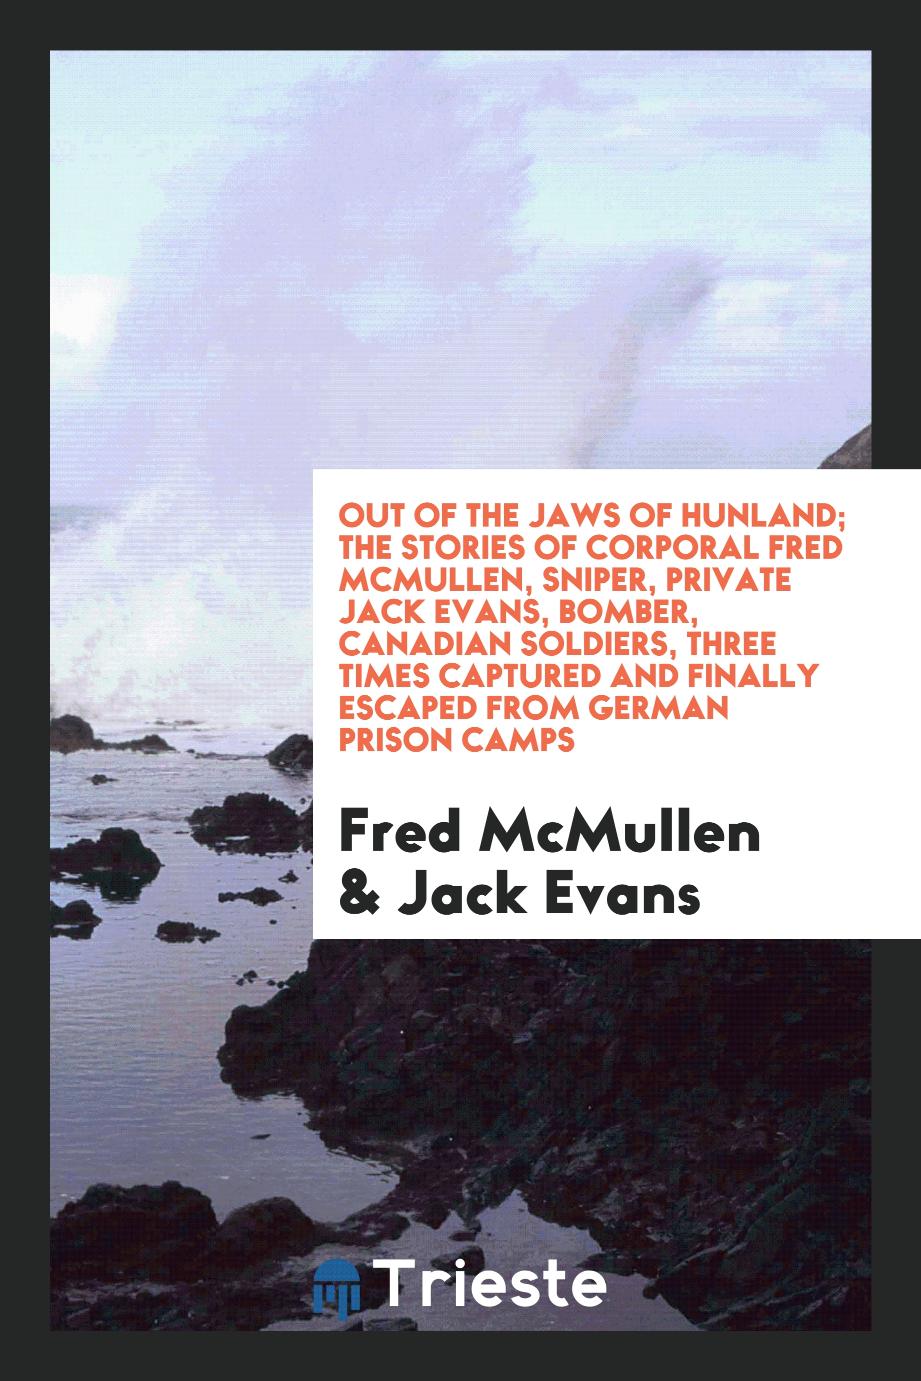 Out of the jaws of Hunland; the stories of Corporal Fred McMullen, sniper, Private Jack Evans, bomber, Canadian soldiers, three times captured and finally escaped from German prison camps